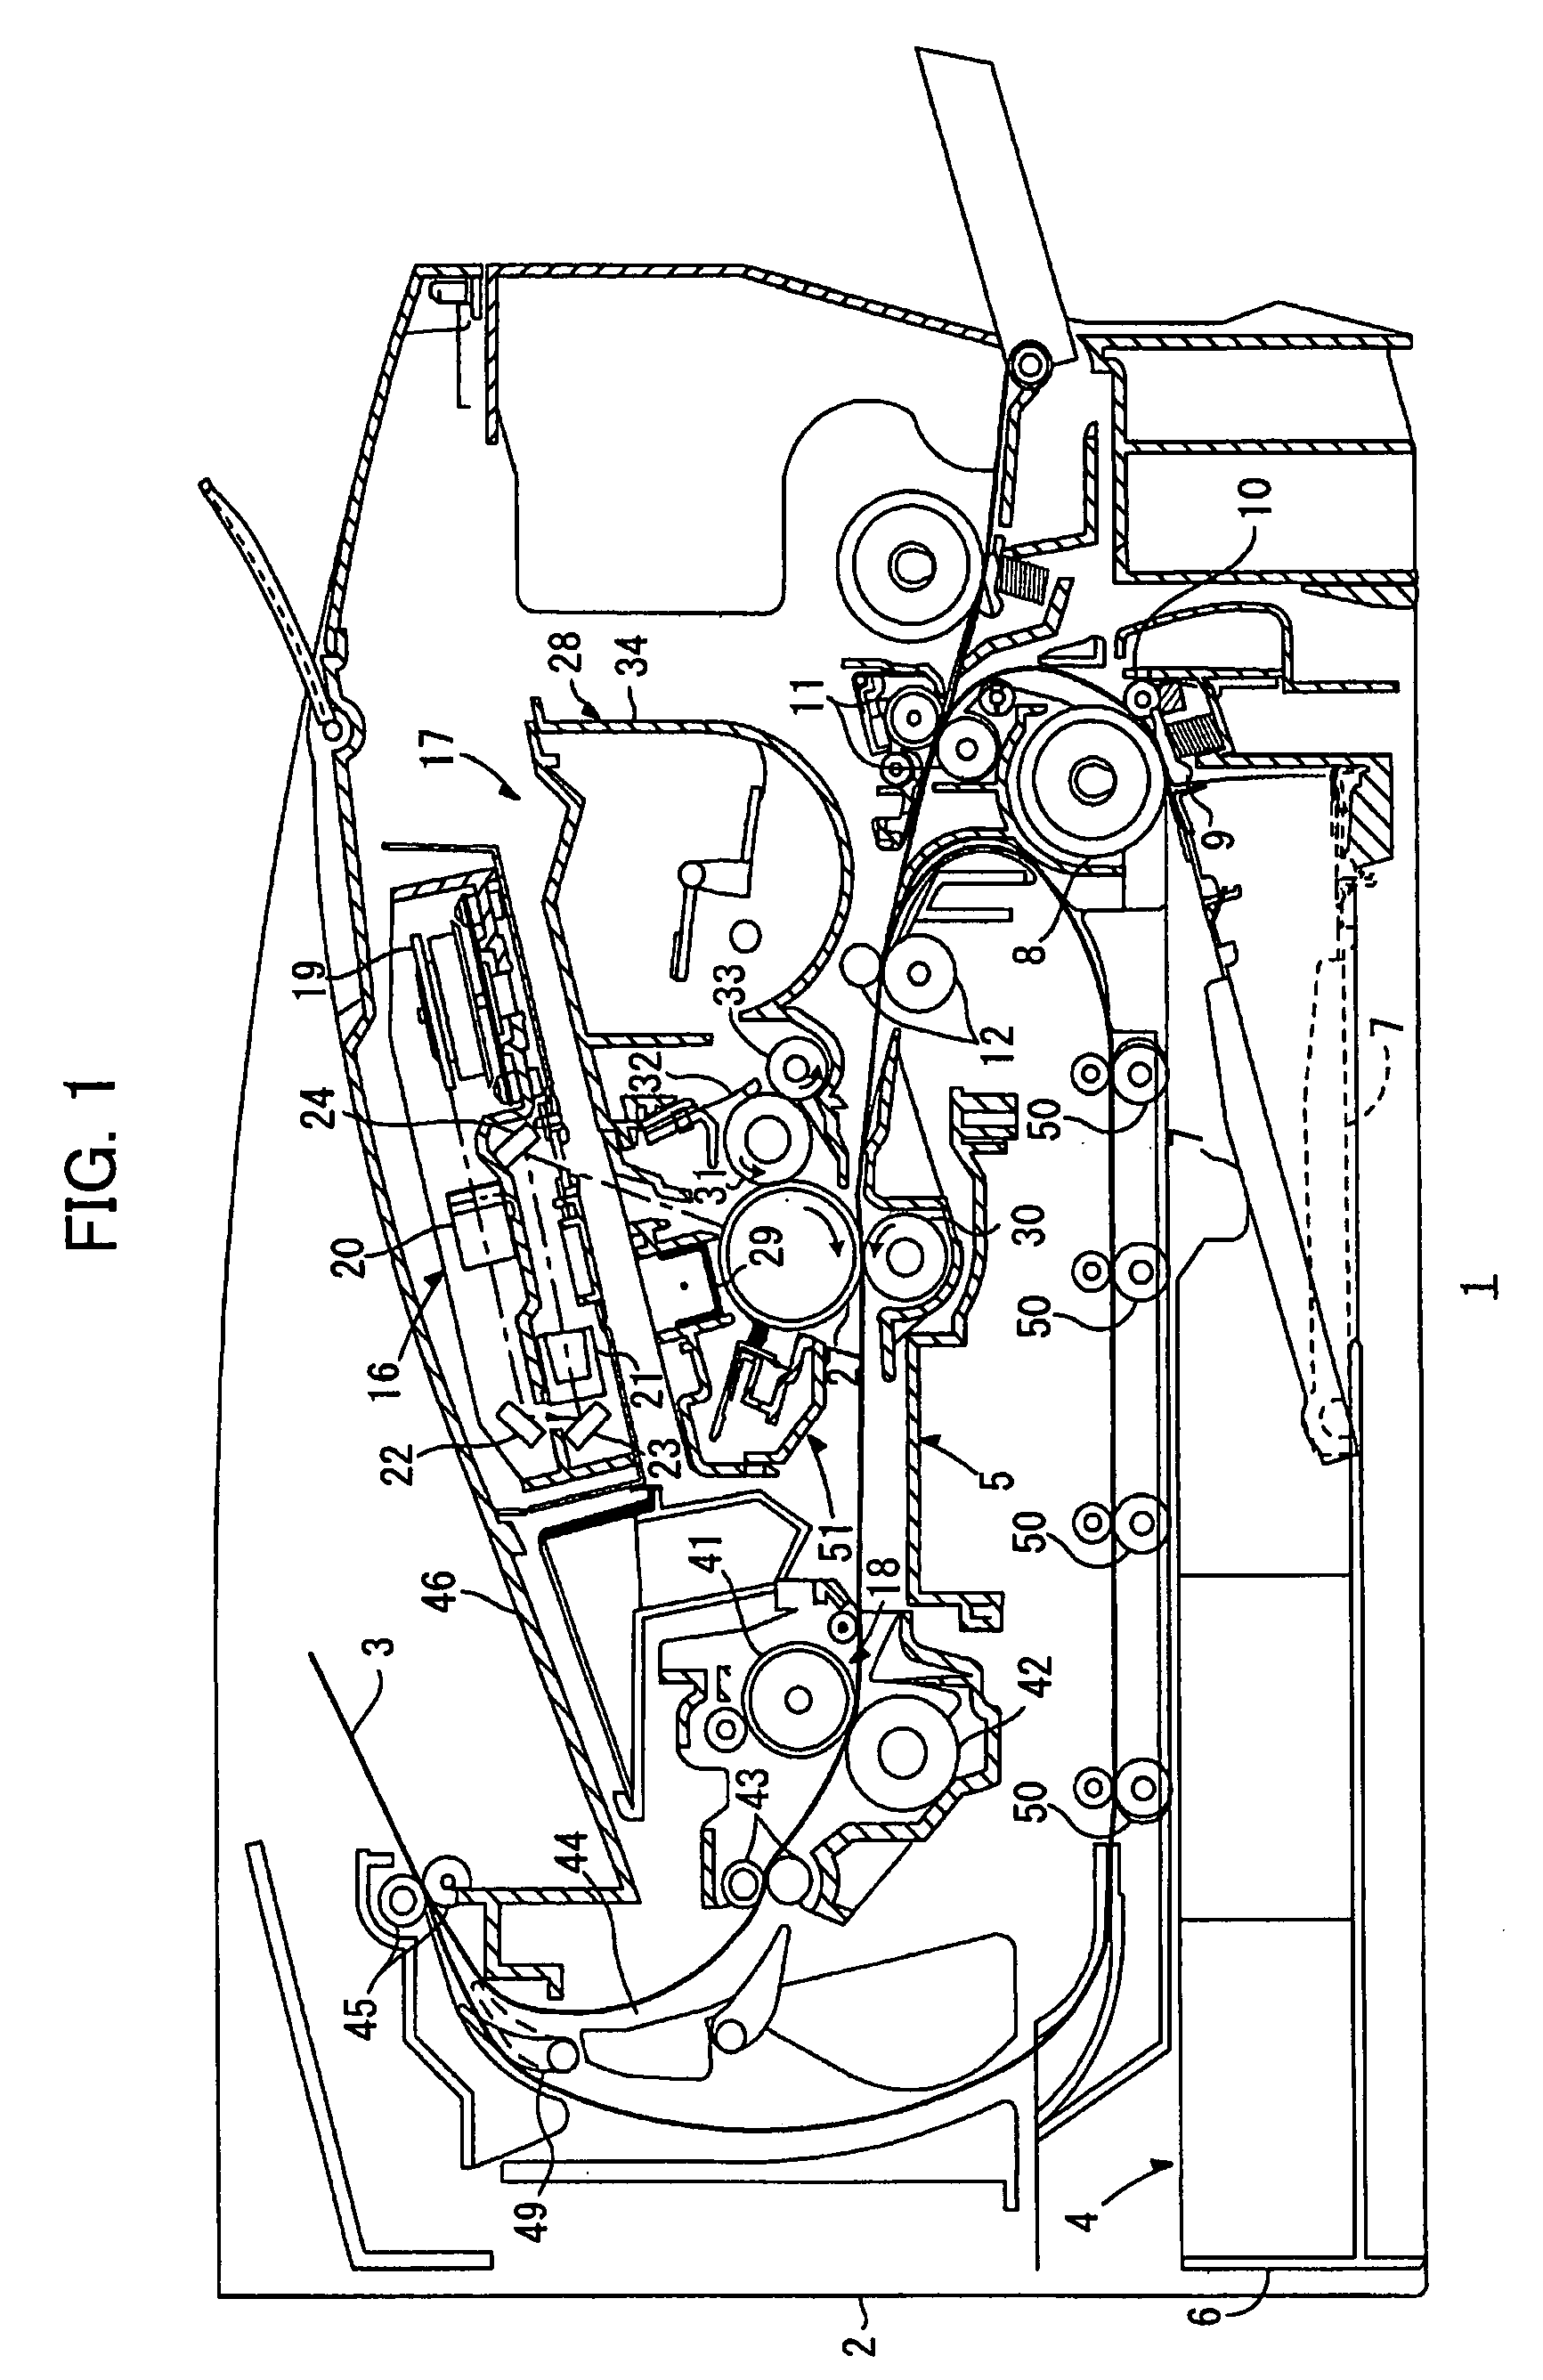 Image-forming device for absorbing vibration of guide plate